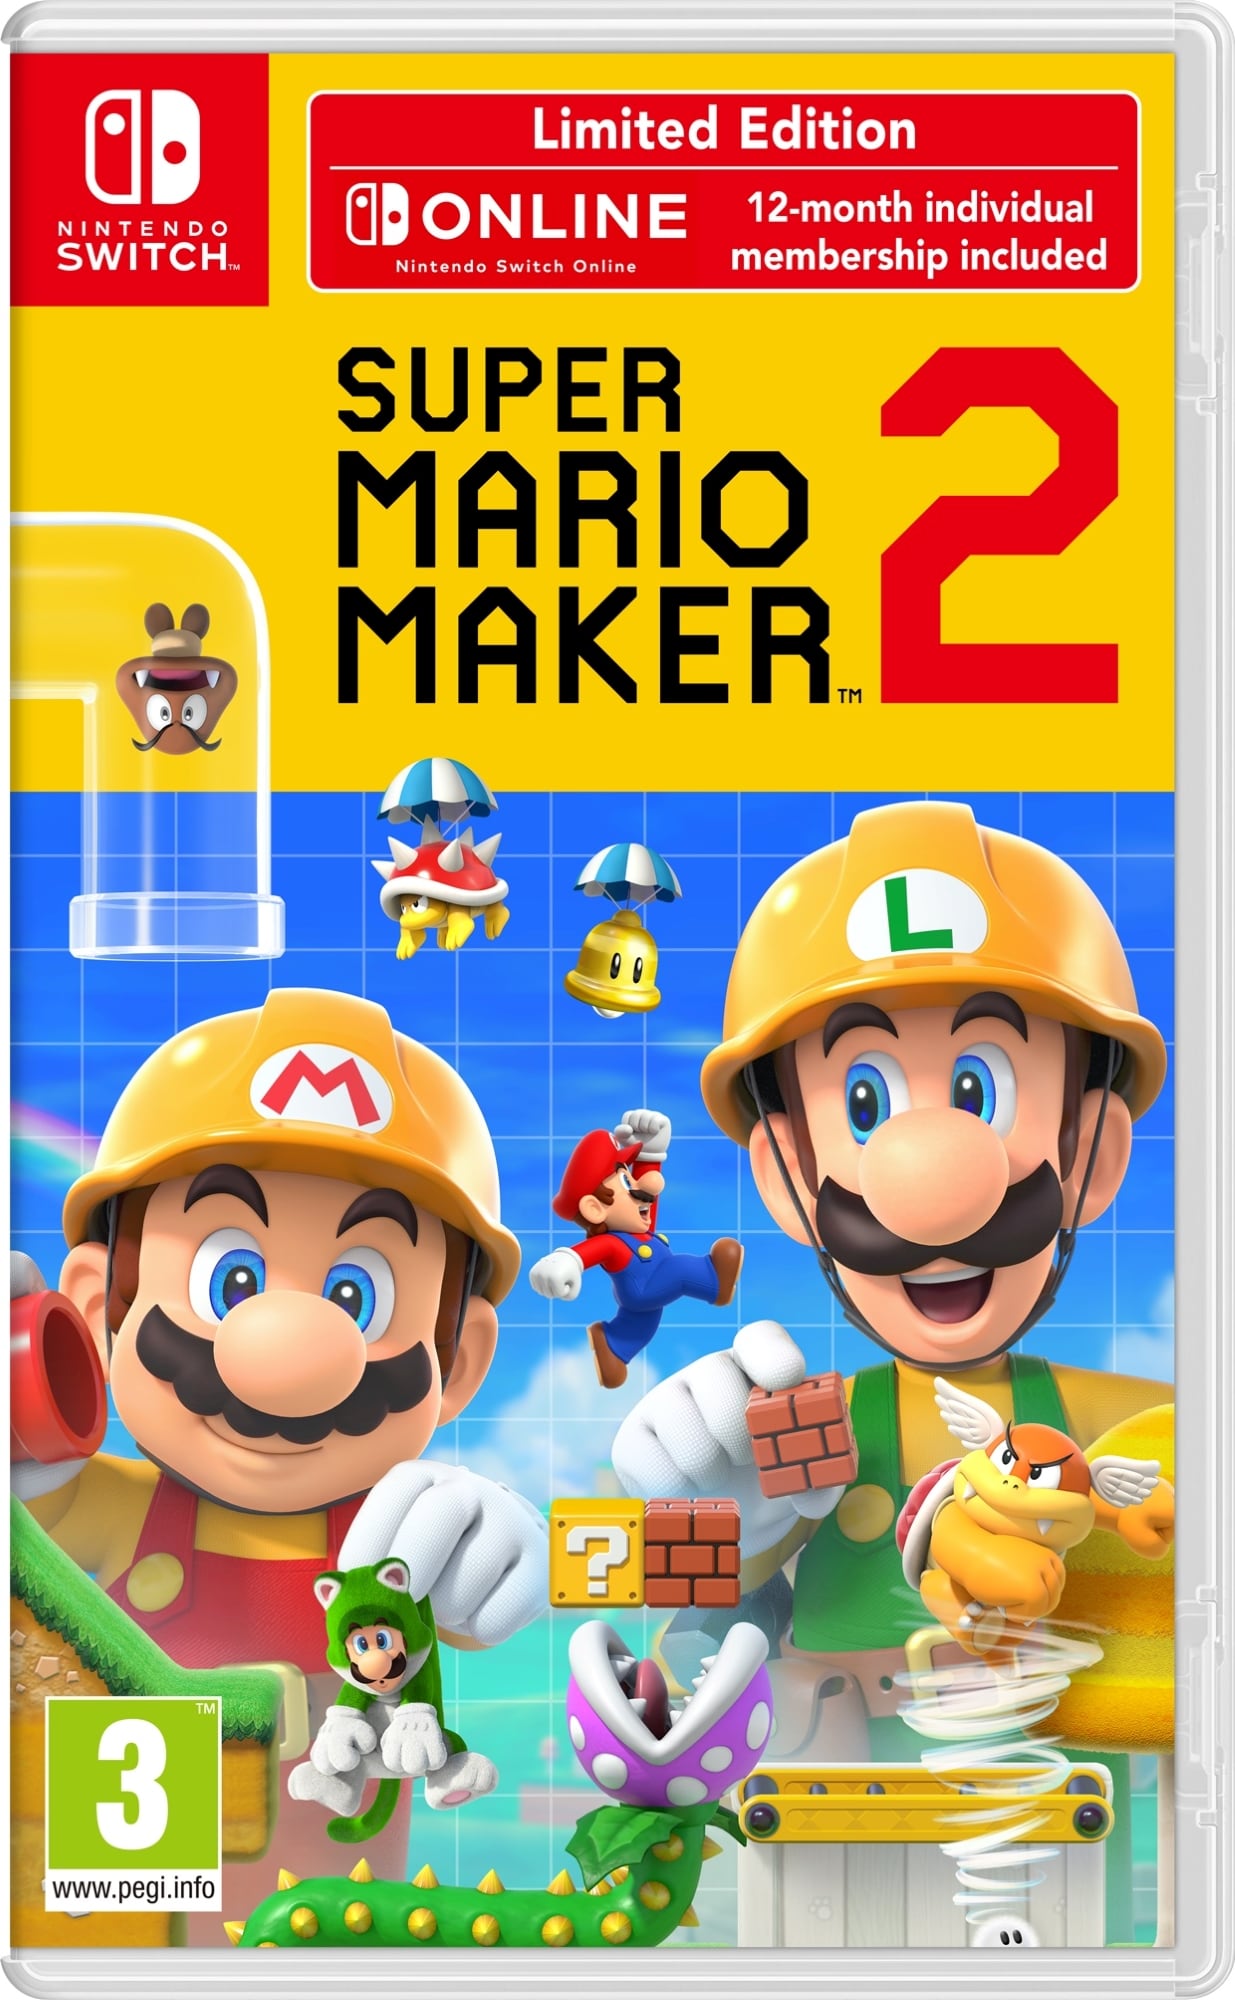 download mario maker 2 online for free